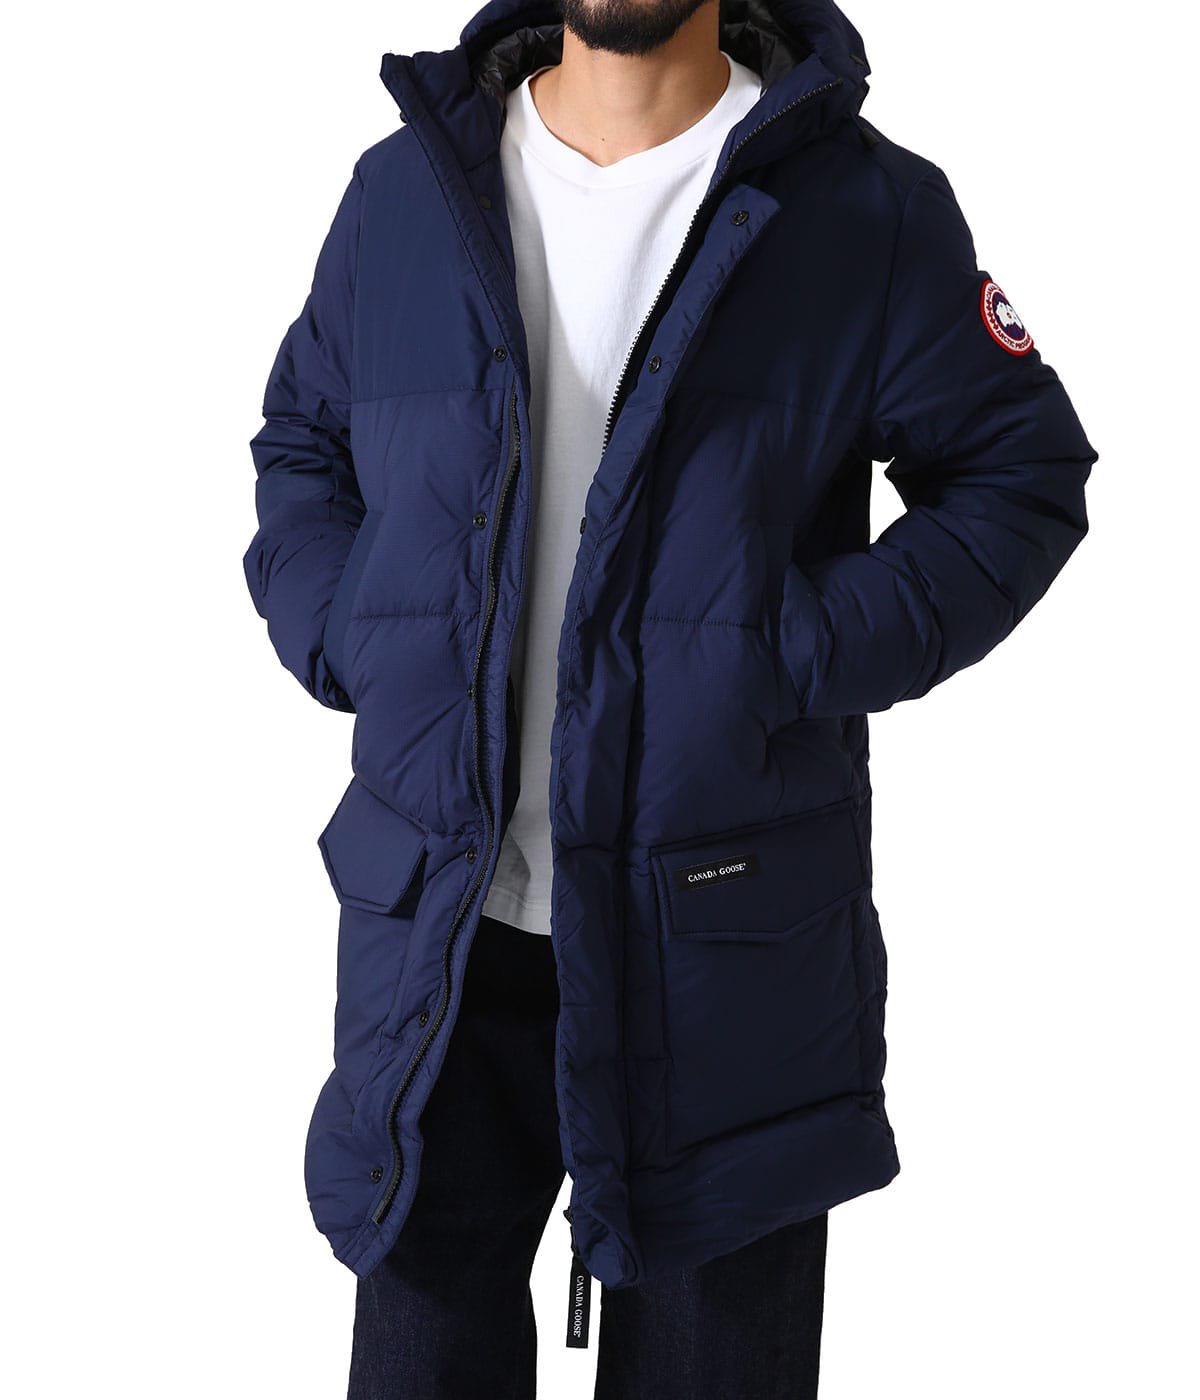 ARMSTRONG PARKA (アームストロング パーカ)